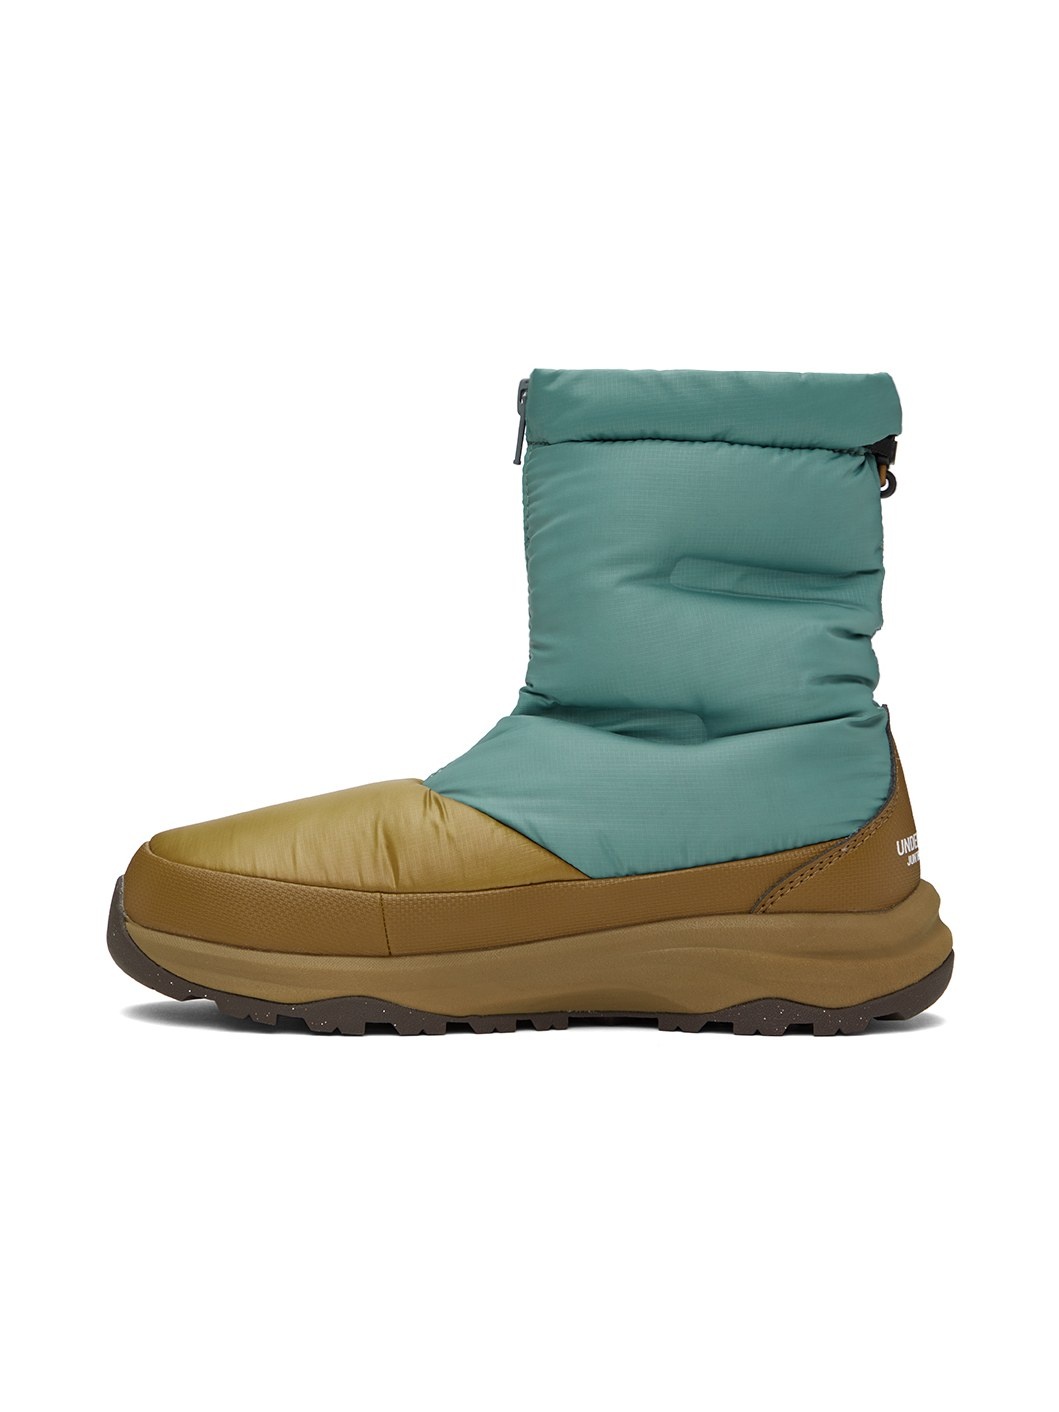 Brown The North Face Edition Soukuu Nuptse Boots - 3